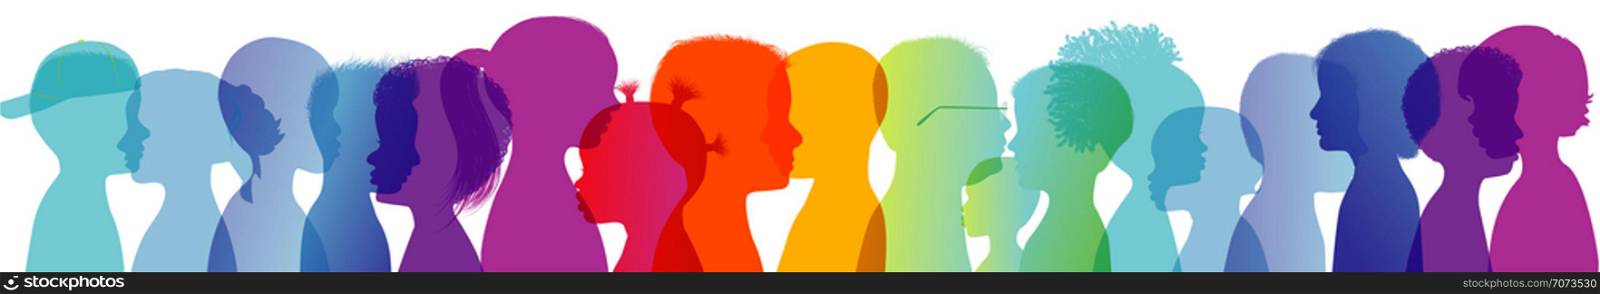 Rainbow group of modern children in colorful silhouette profile. Communication between multi-ethnic children. Children talking. Colored heads. Multiple exposure